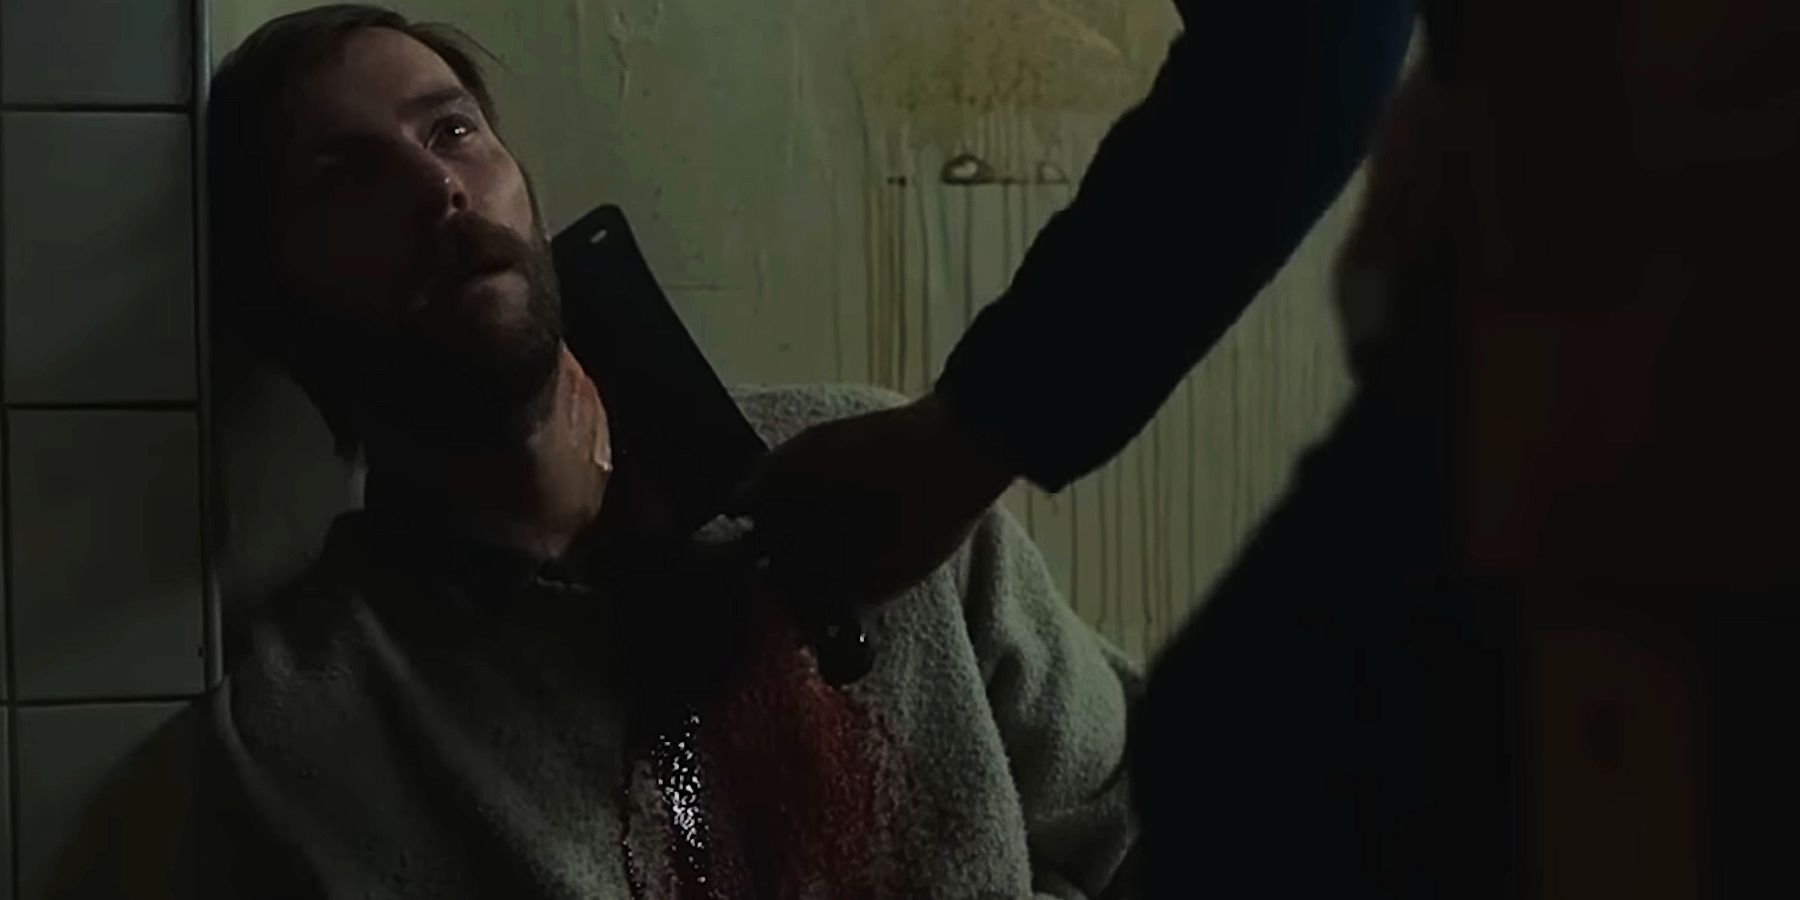 The Last of Us season 1 episode 8 Troy Baker As James Death By Meat Cleaver